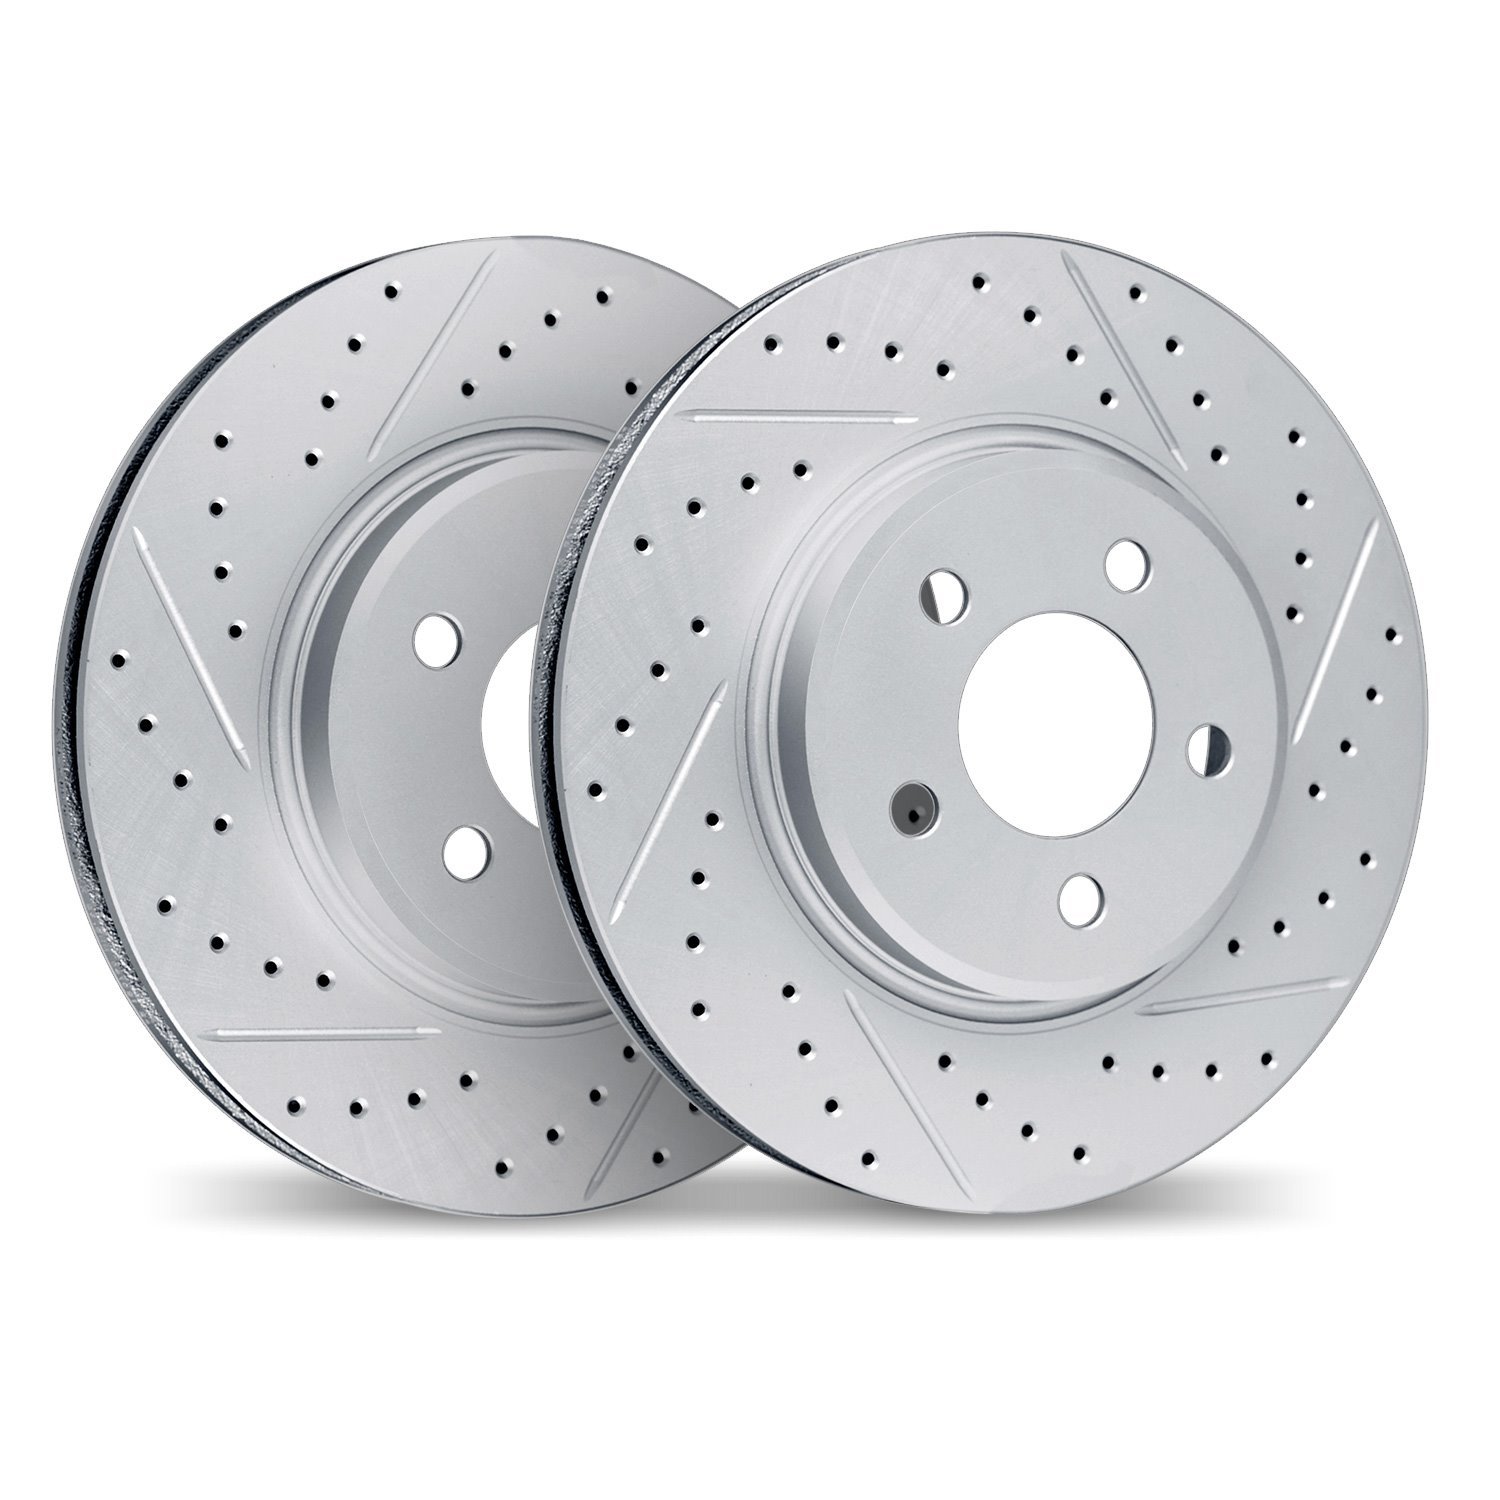 2002-54103 Geoperformance Drilled/Slotted Brake Rotors, 1995-1997 Ford/Lincoln/Mercury/Mazda, Position: Front